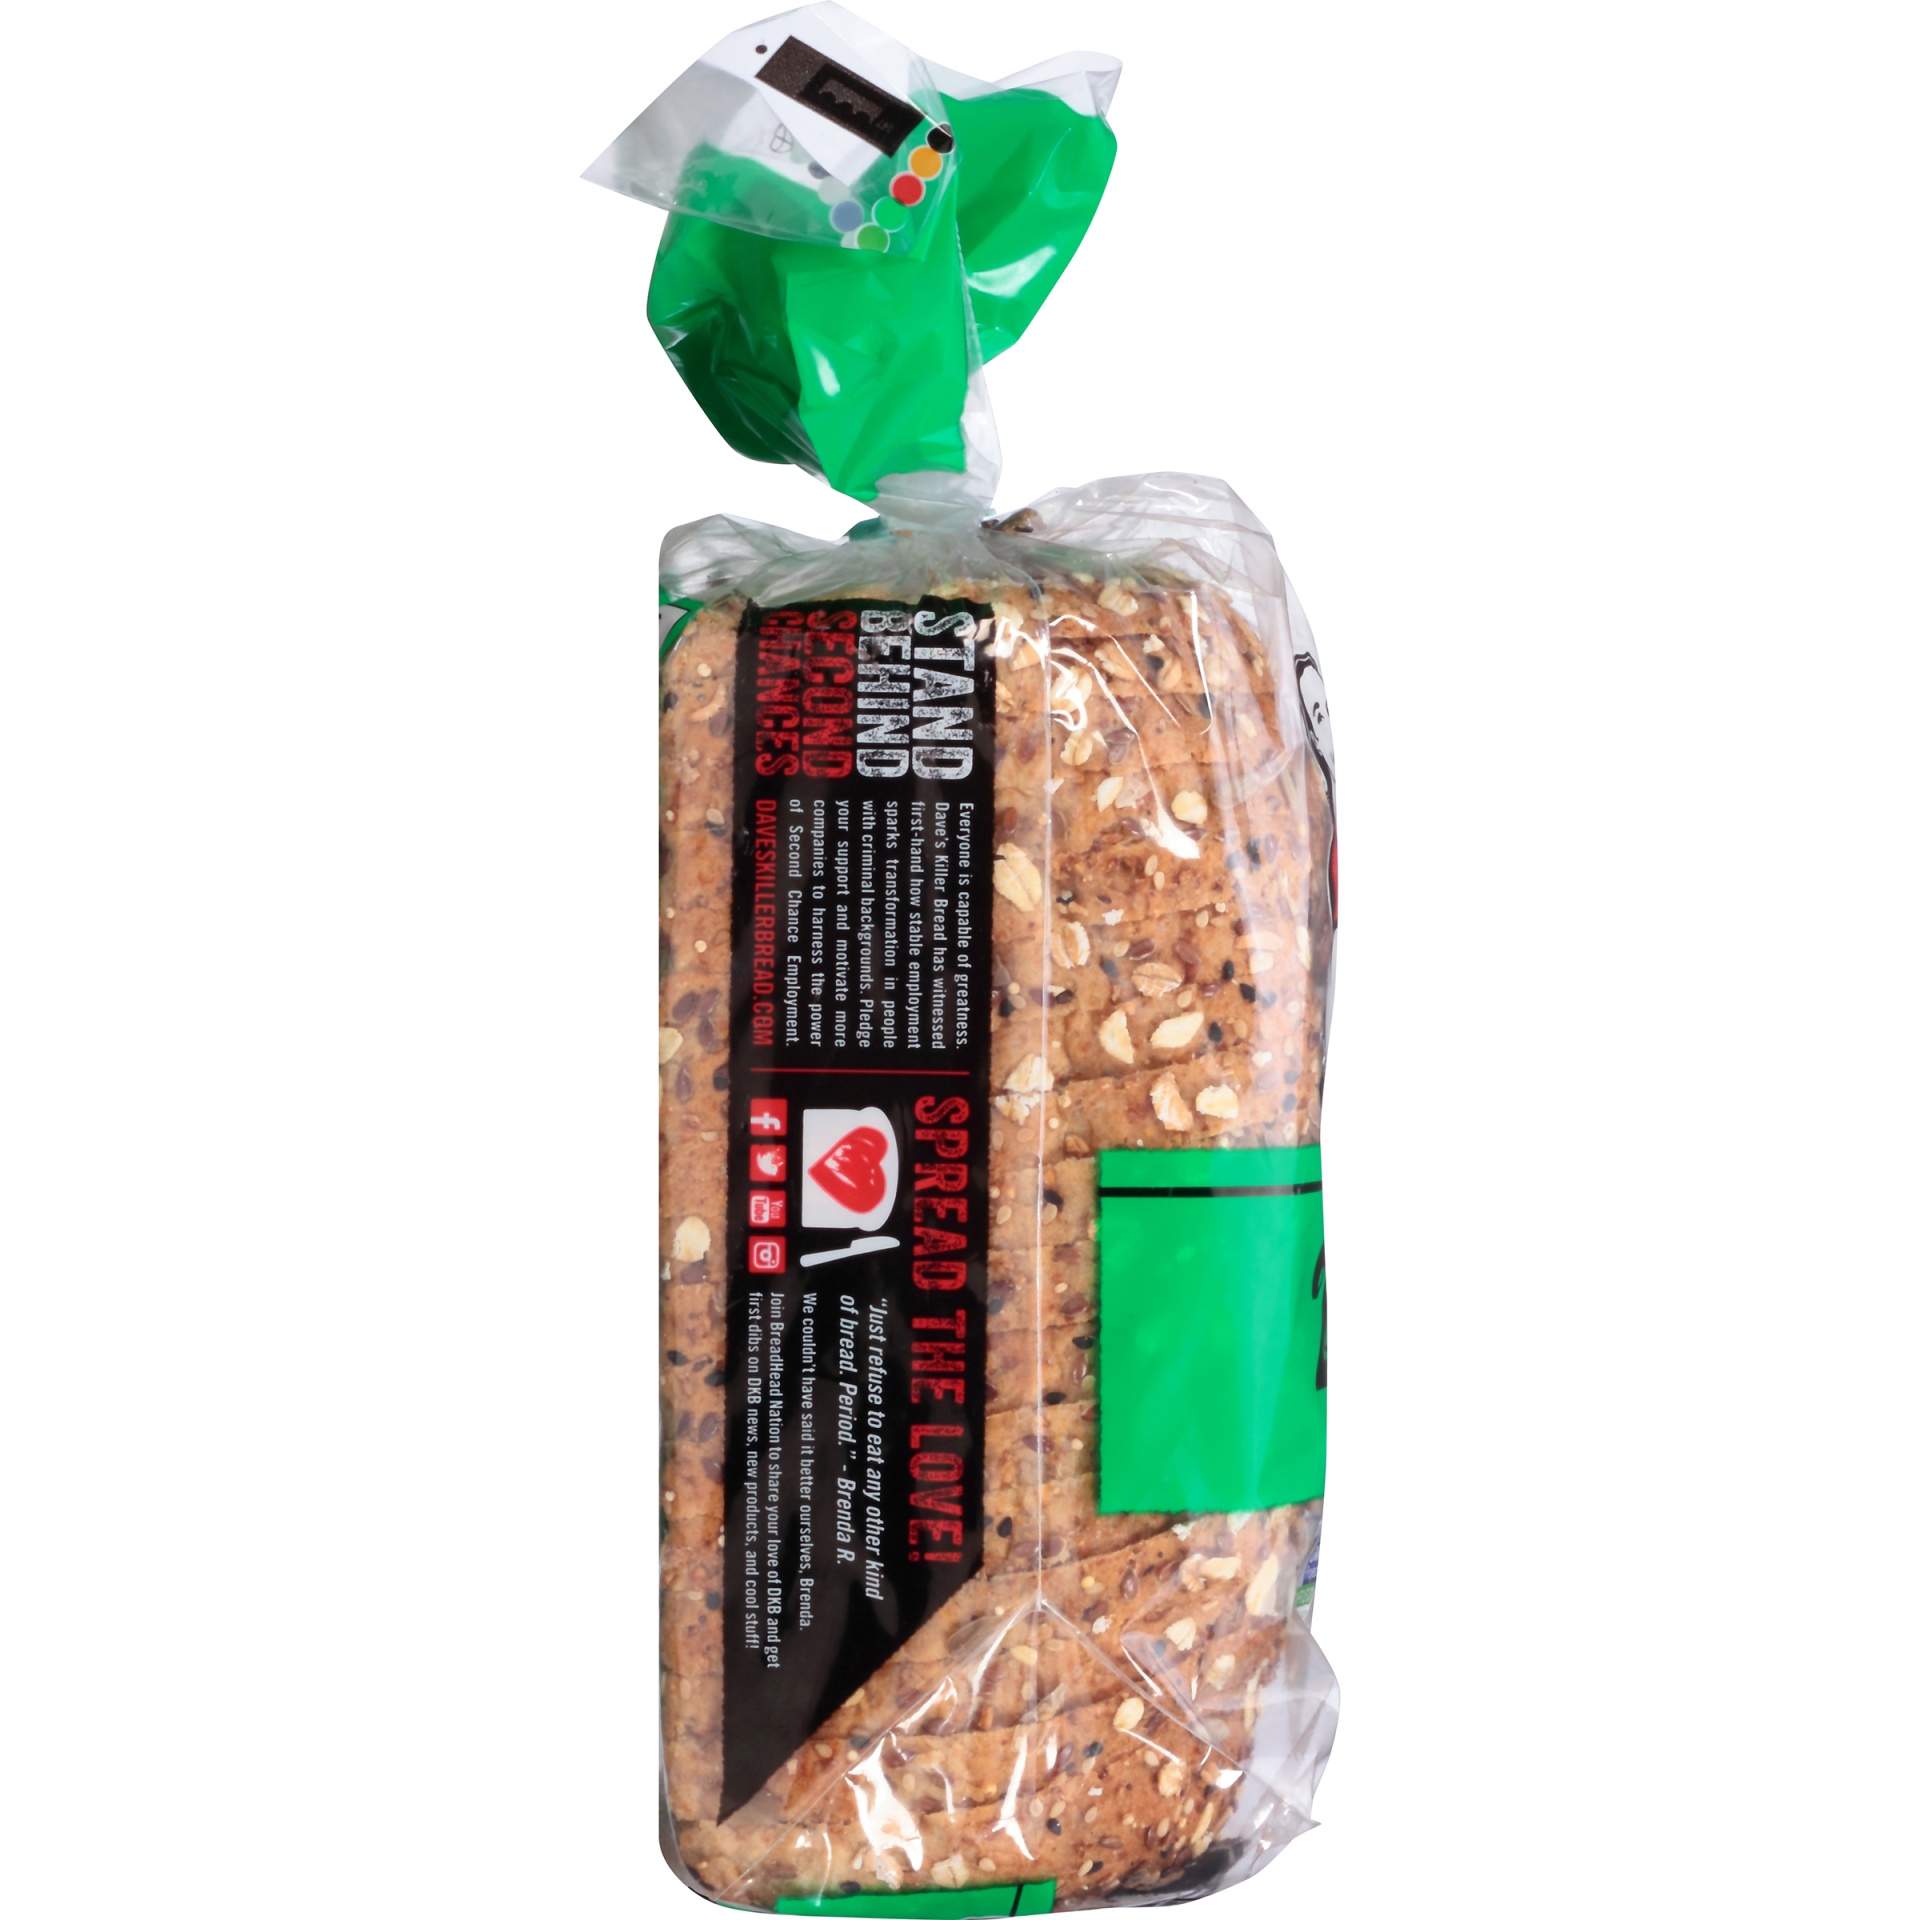 slide 6 of 8, Dave's Killer Bread Organic 21 Whole Grains and Seed Bread - 27oz, 27 oz